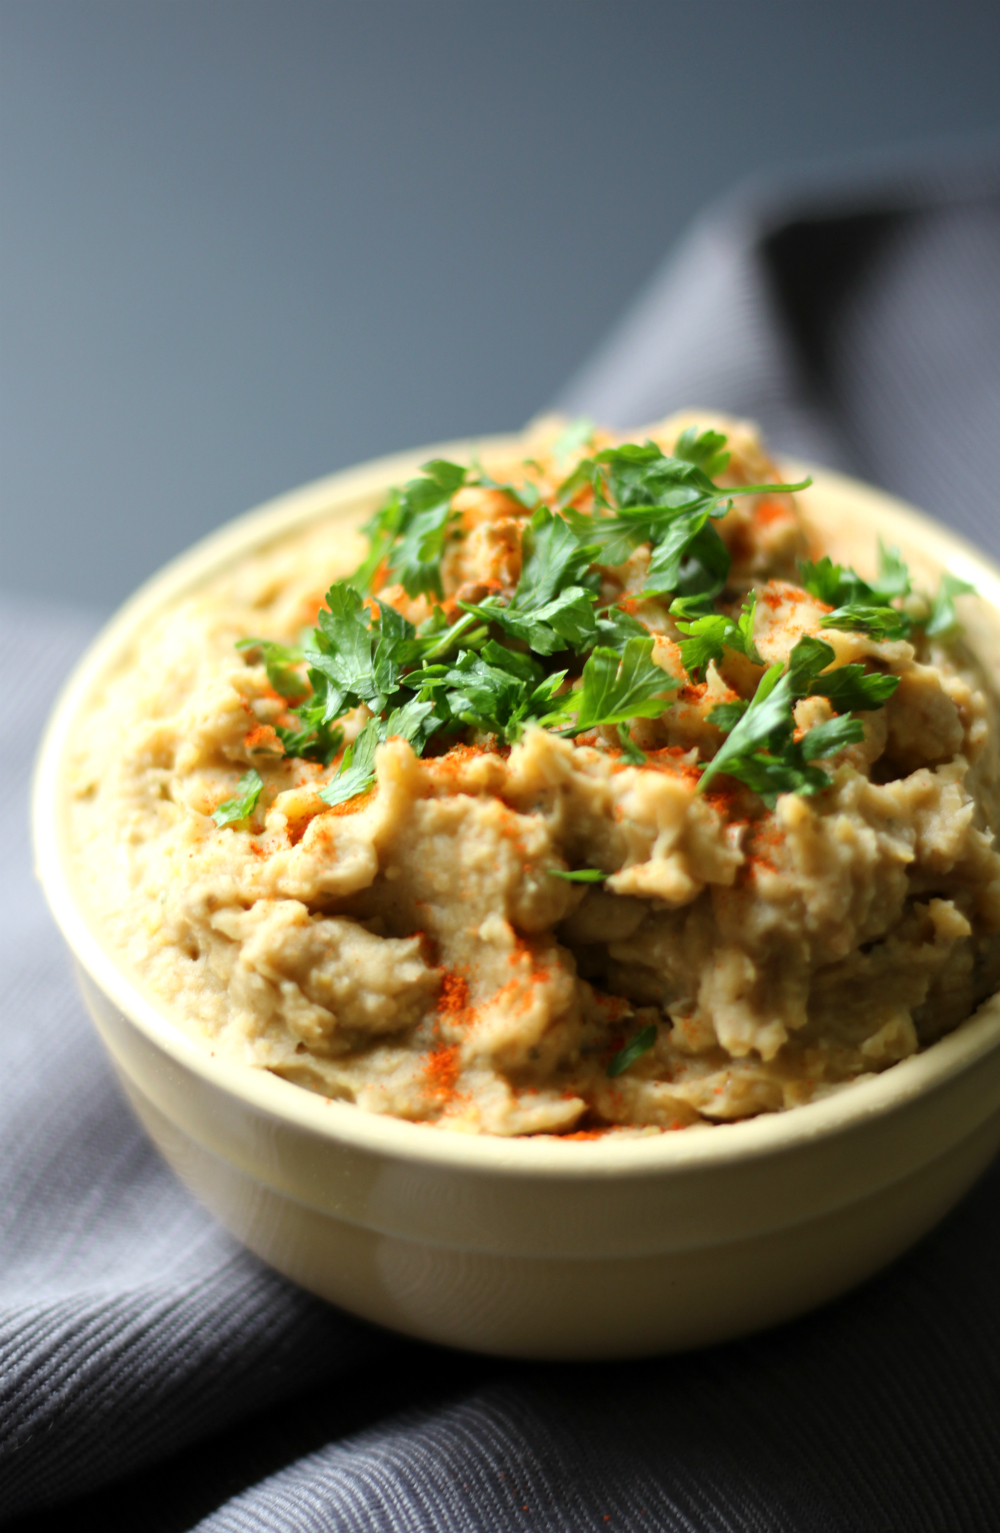 Baba Ghanoush Hummus | Strength and Sunshine @RebeccaGF666 Combine 2 of the best dip recipes to make Baba Ghanoush Hummus! Full of deep, smoky, and roasted flavors, this condiment will seem like a meal! Gluten-free, vegan, and nut-free, with eggplant and chickpeas, you'll get your healthy veggies and protein in one dip!